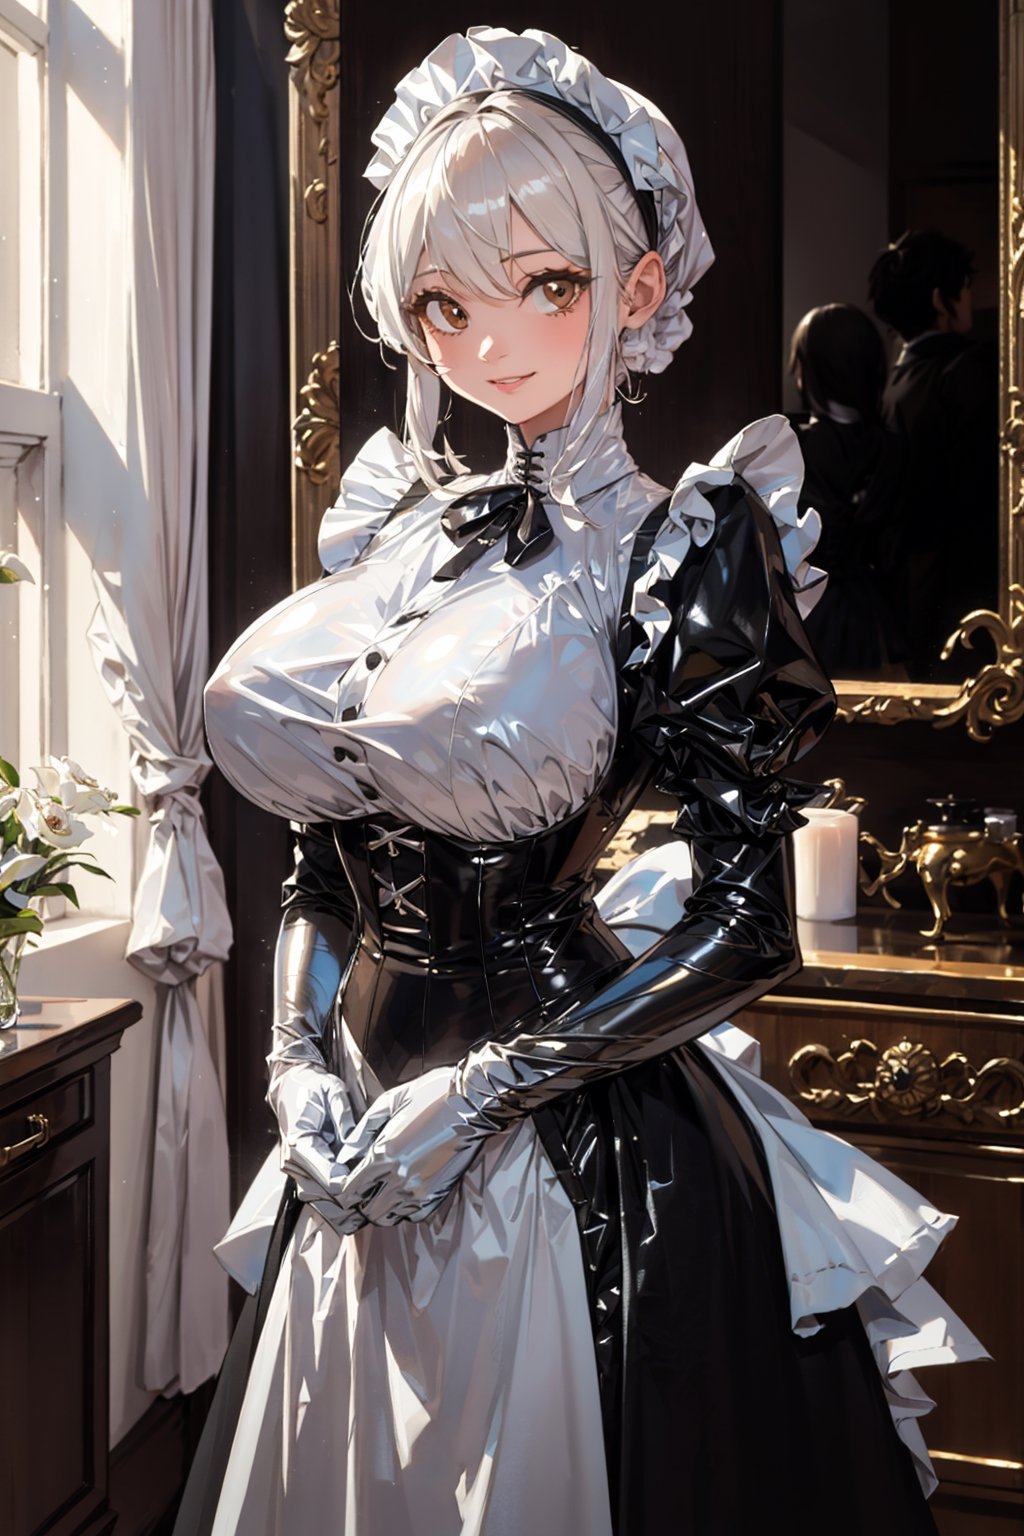 Imagine this. Upscaled. (Masterpiece, best quality, high resolution, highly detailed), Indoors detailed background, perfect lighting. (1girl:1.3), solo, (Hands:1.1), better_hands, gloved hands, better_hands. Rule of thirds,
Corny Katrina maid with white hair smiling and teasing you. Maid, black dress (dress:1.2), heavy duty working rubber gloves, puffy skirt, long skirt, puffy sleeves, long sleeves, Juliet sleeves, buttoned blouse with Victorian neck, tight corset, (huge breasts:1.1), breastfeeding chest. Indoors, (renaissance, vintage:1.2), ornate walls, 
By Paracosmos. 
,nodf_lora,LatexConcept